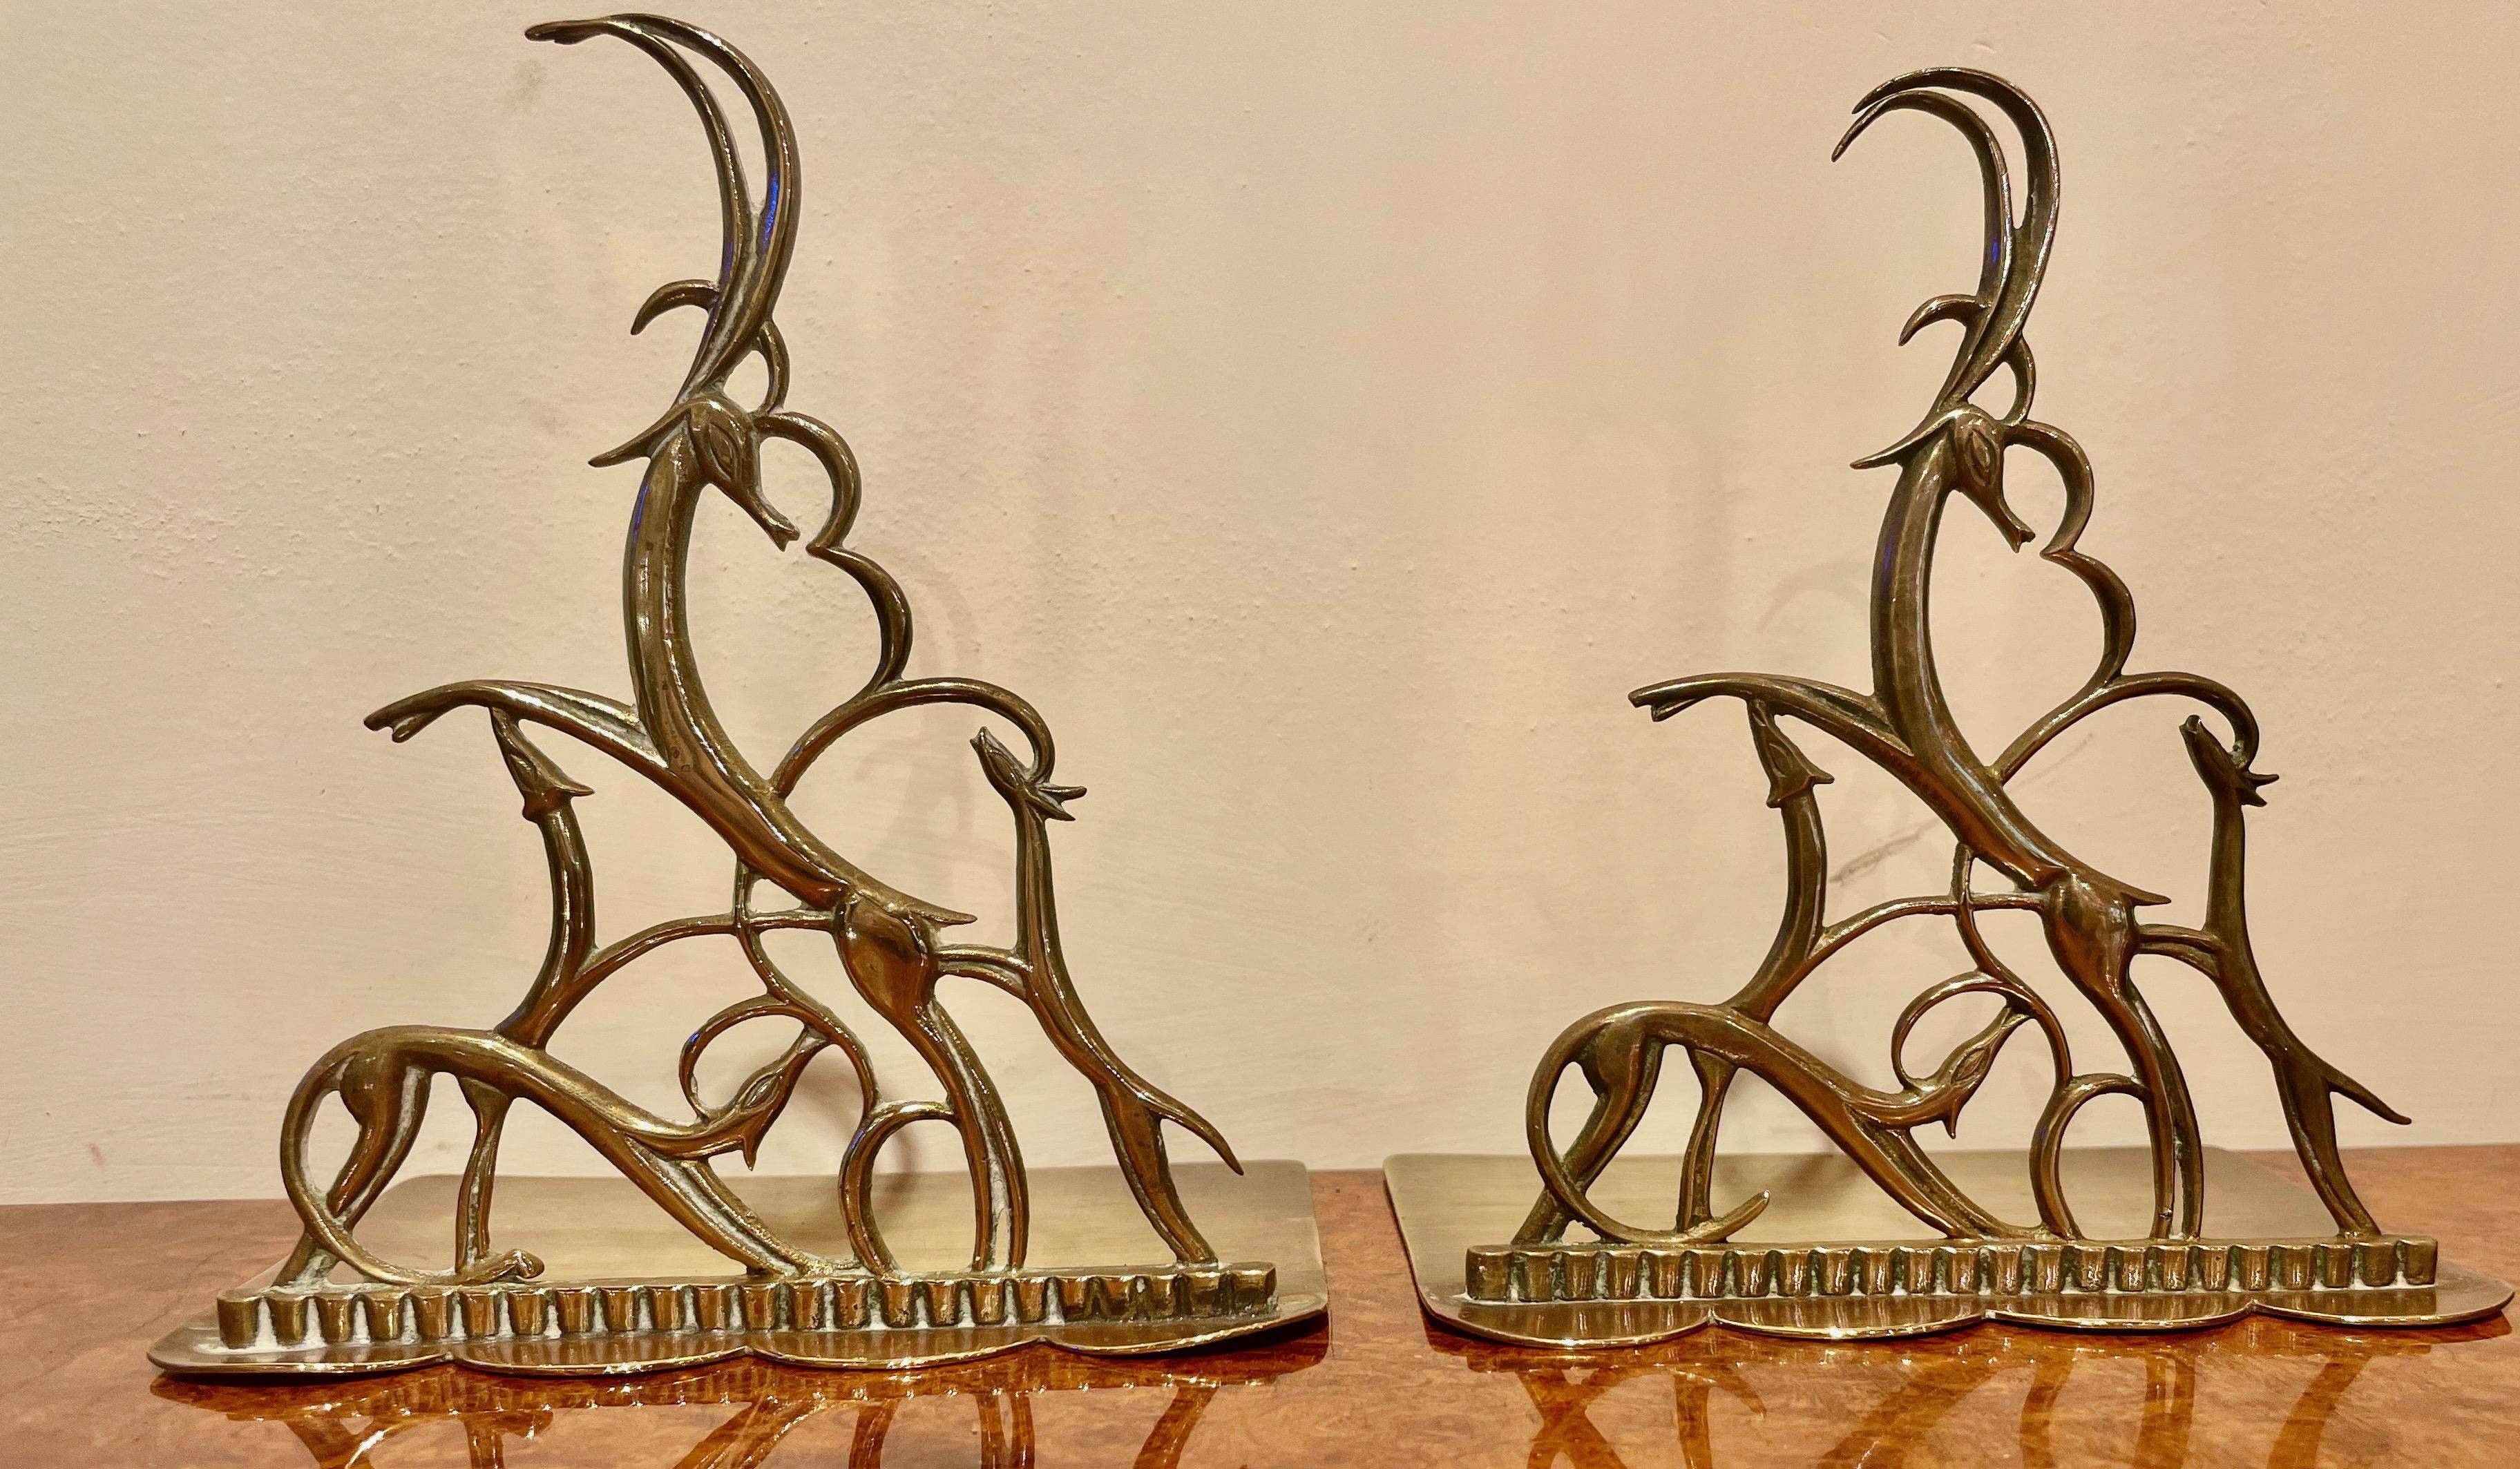 Hagenauer bookends pair leaping gazelles. The original had rubbed brass patina finish—stylized Haenauer animals, four intertwined and perfectly proportioned. The size is enough to support books and still look sculptural and elegant. Both items are